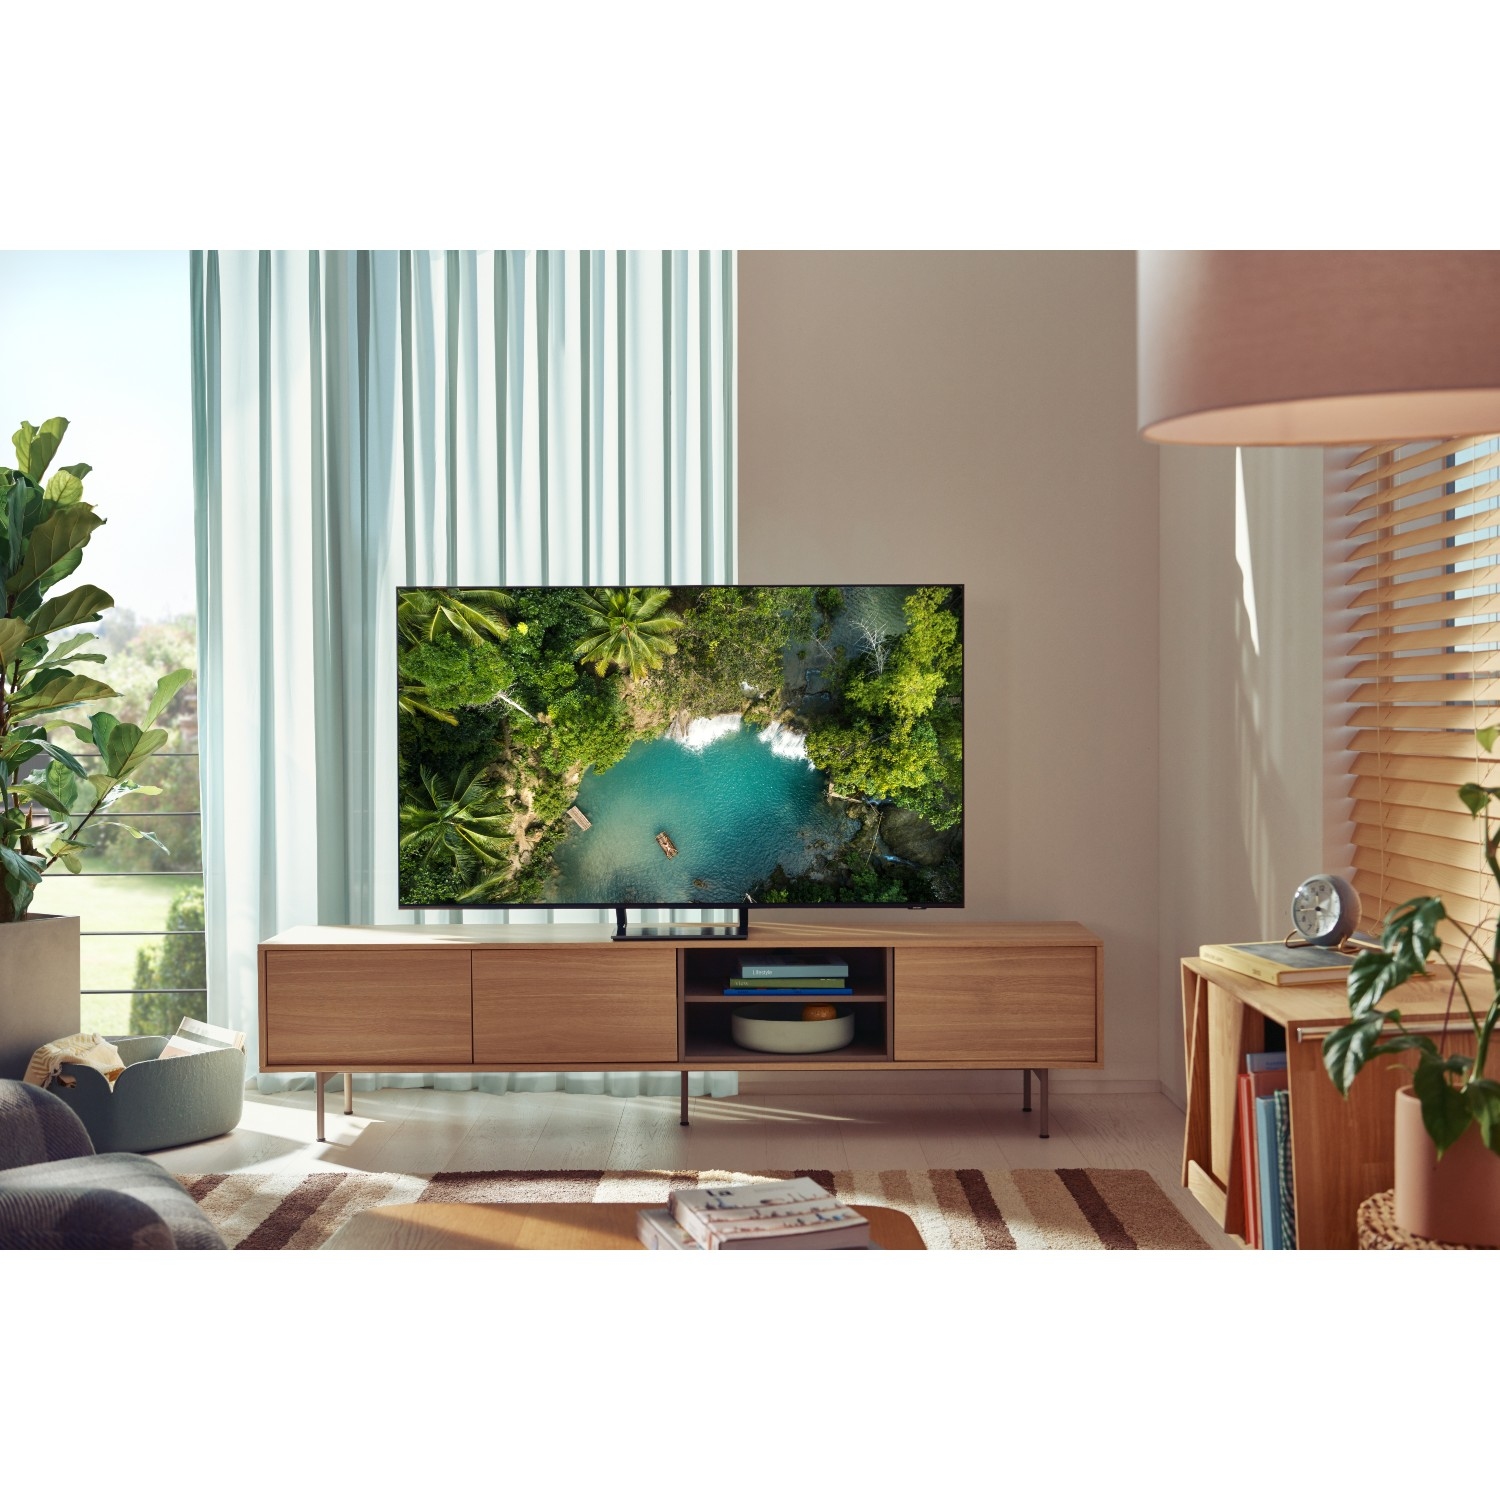 Samsung UE75AU9000KXXU 75" Crystal 4K UHD HDR Smart TV Dynamic Crystal Colour with Motion Xcelerator Turbo and Object Tracking Sound - 4